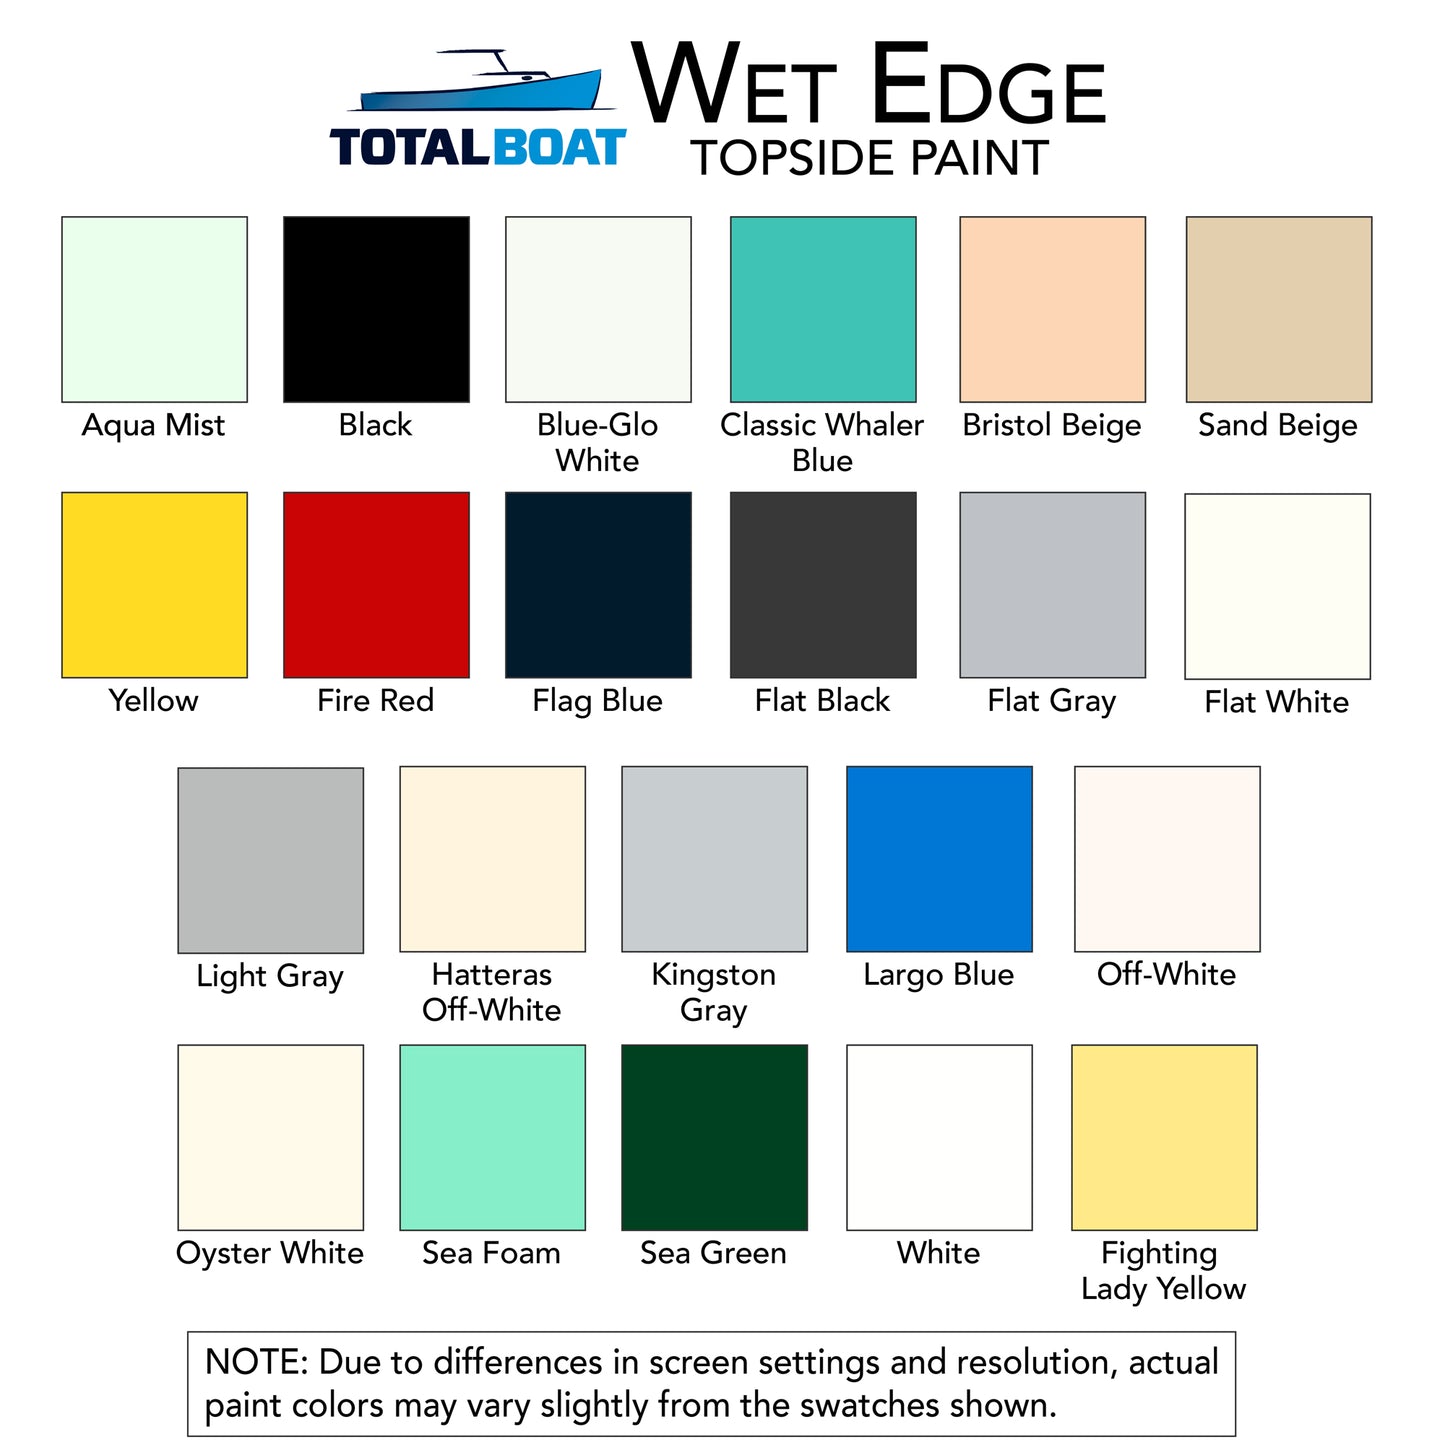 TotalBoat Wet Edge Topside Paint Color Chart